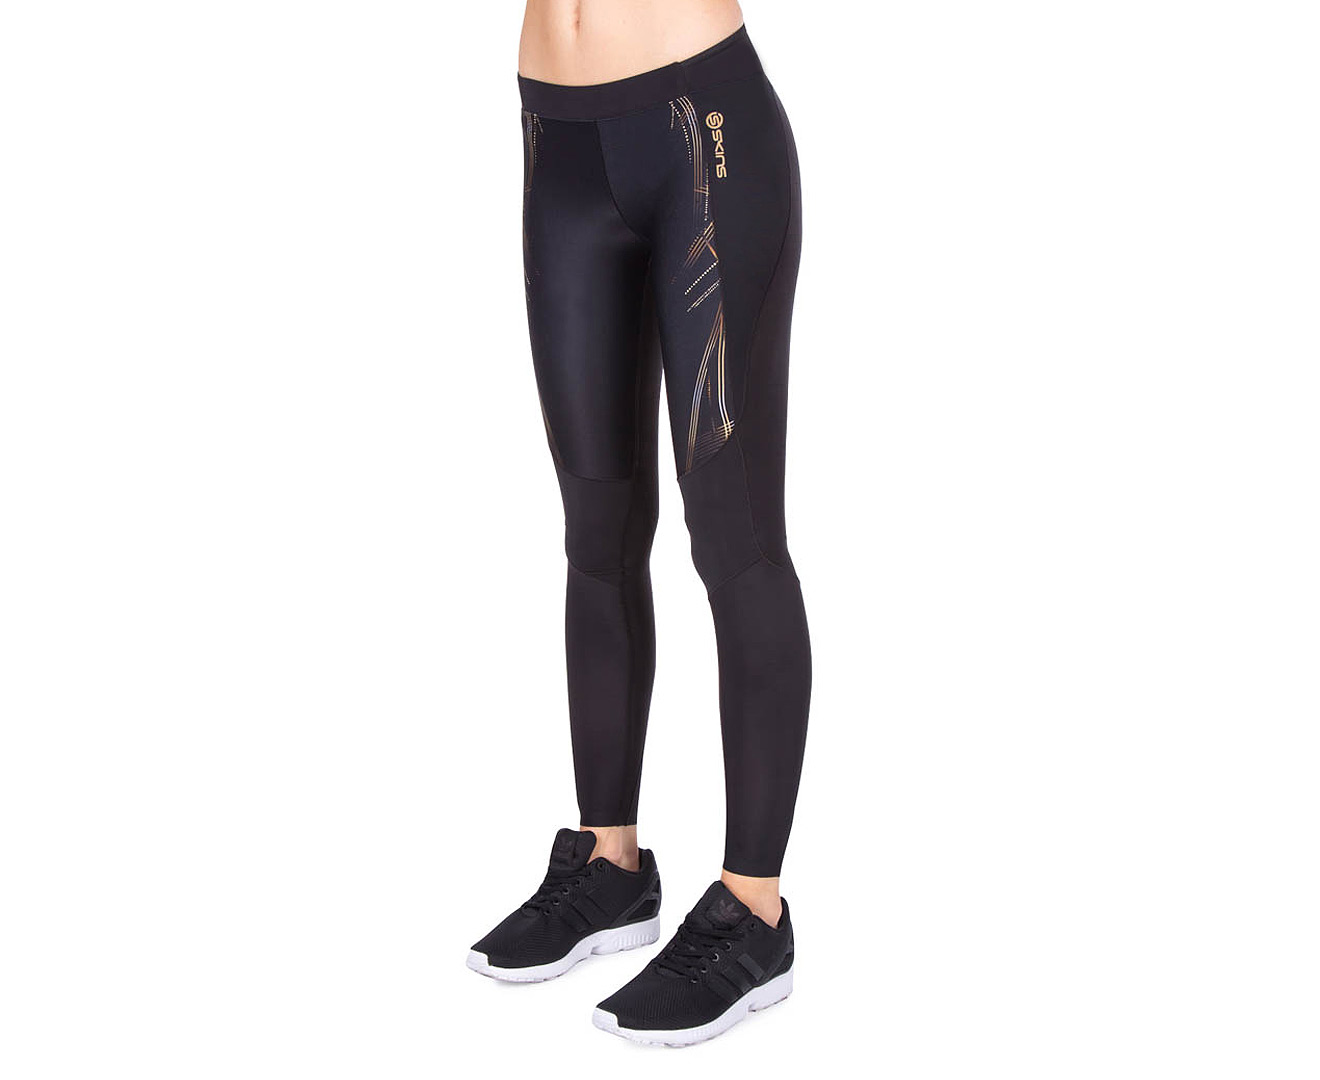 Skins A400 Women's Compression Long Tights Black/Gold